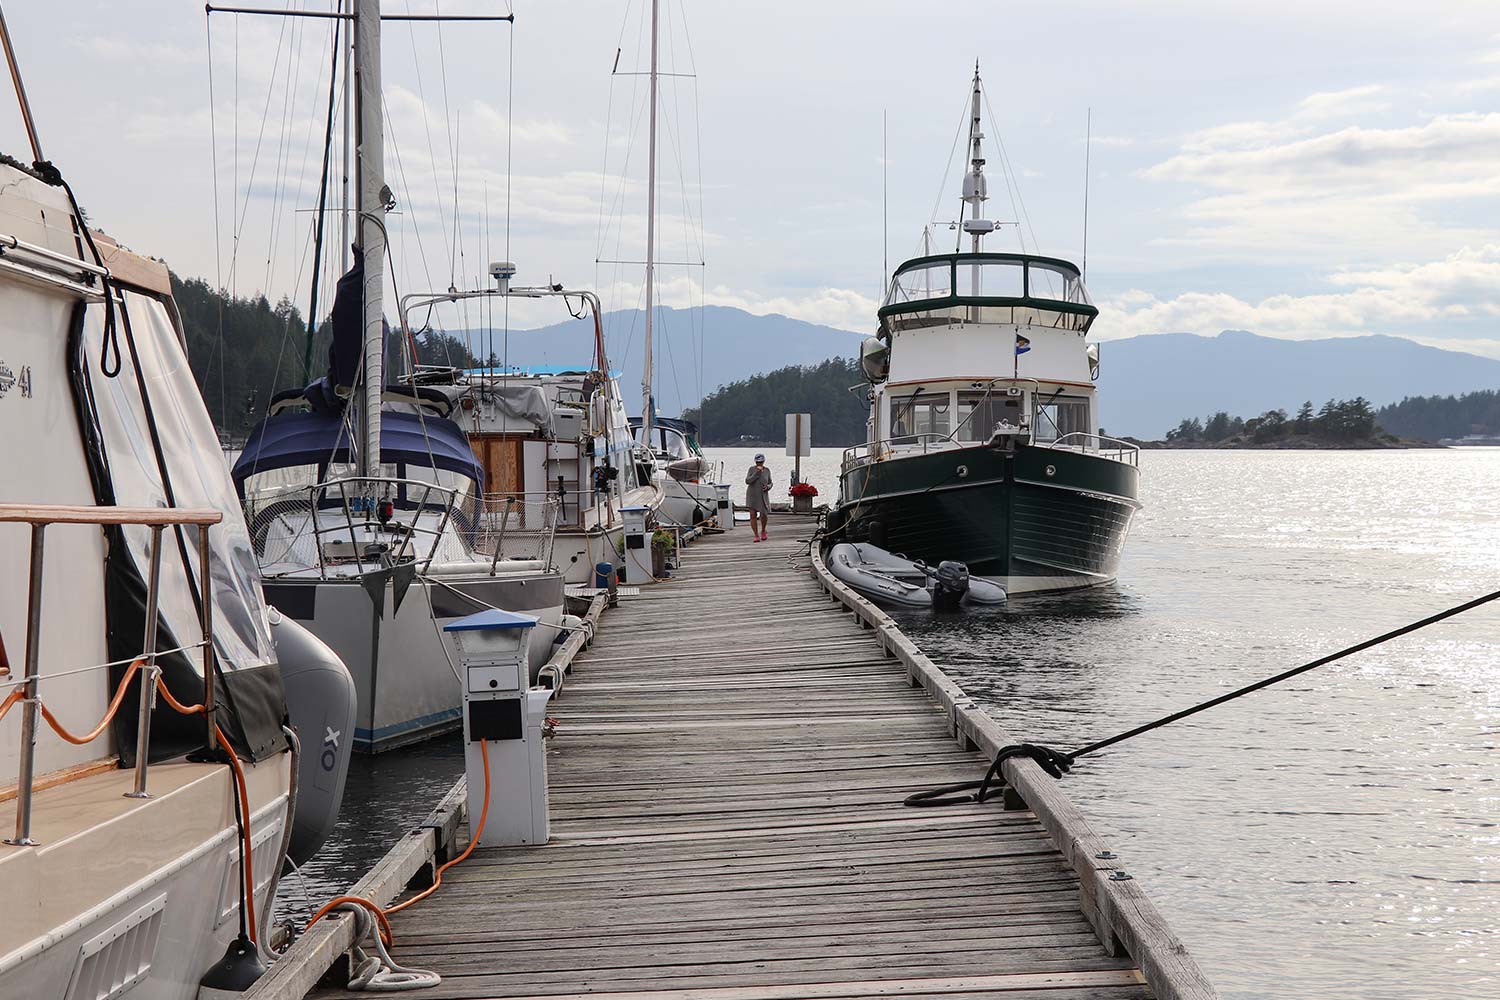 A lady walks down the dock, between several vessels parked at John Henrys Boat Moorage.